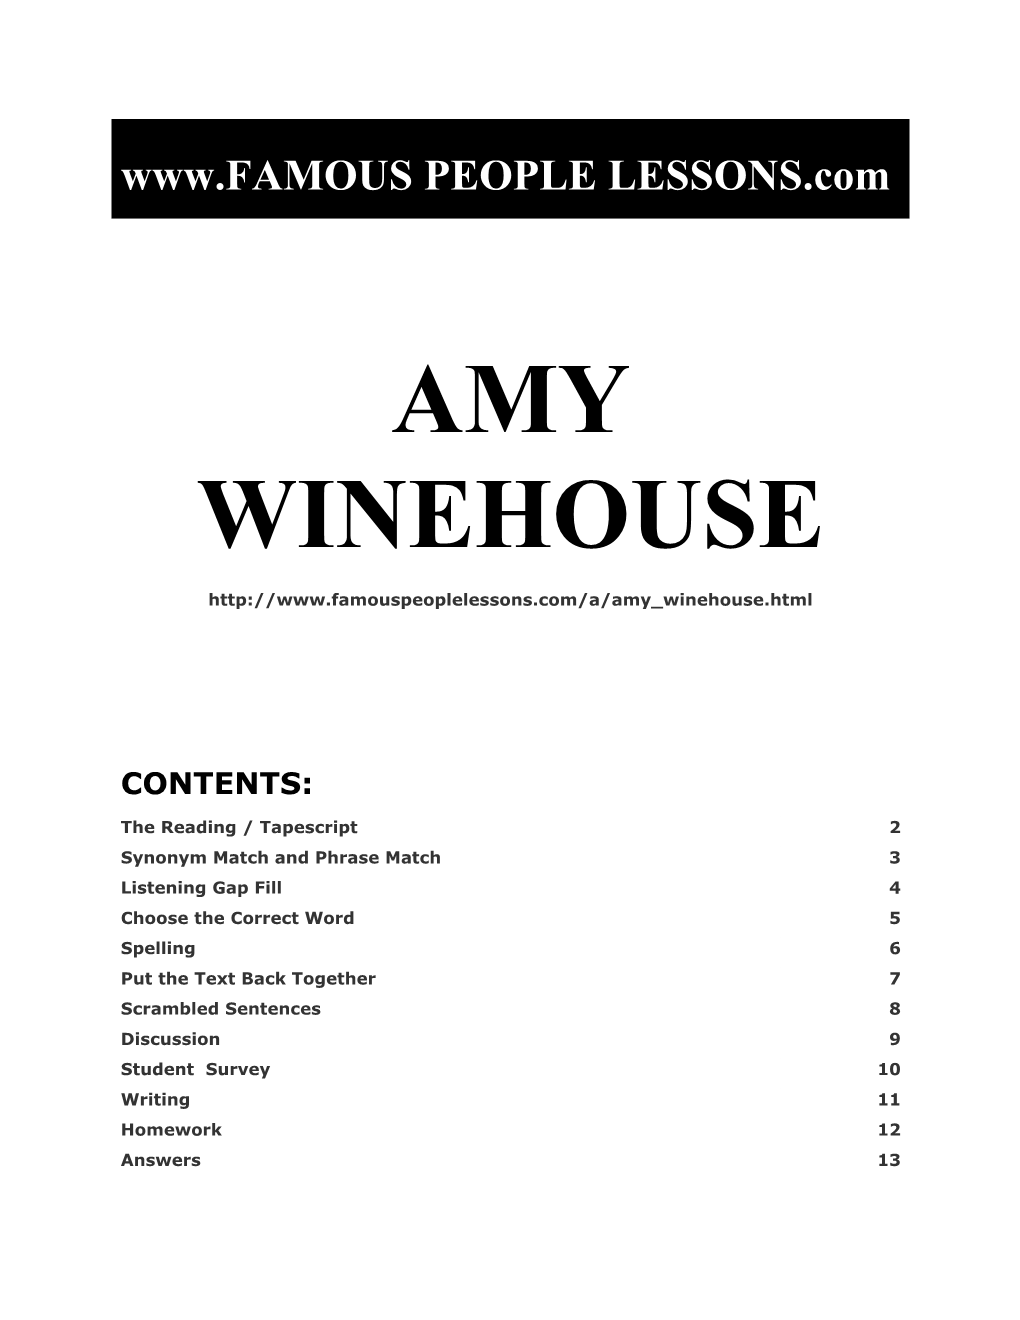 Famous People Lessons - Amy Winehouse